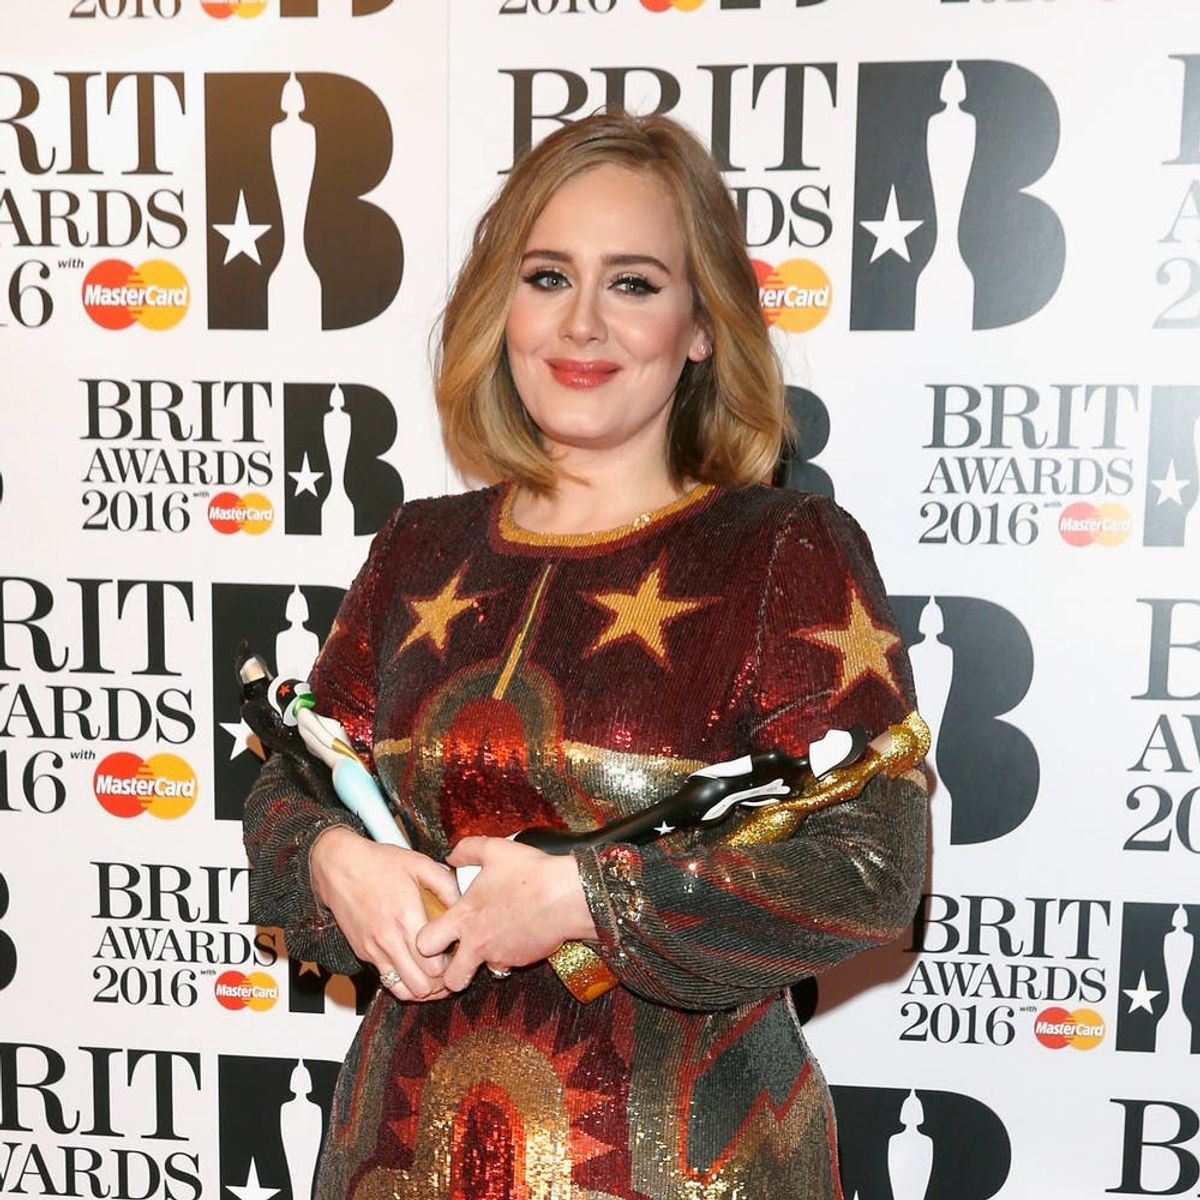 You Won’t Believe the Super Embarrassing Thing That Just Happened to Adele While Shopping